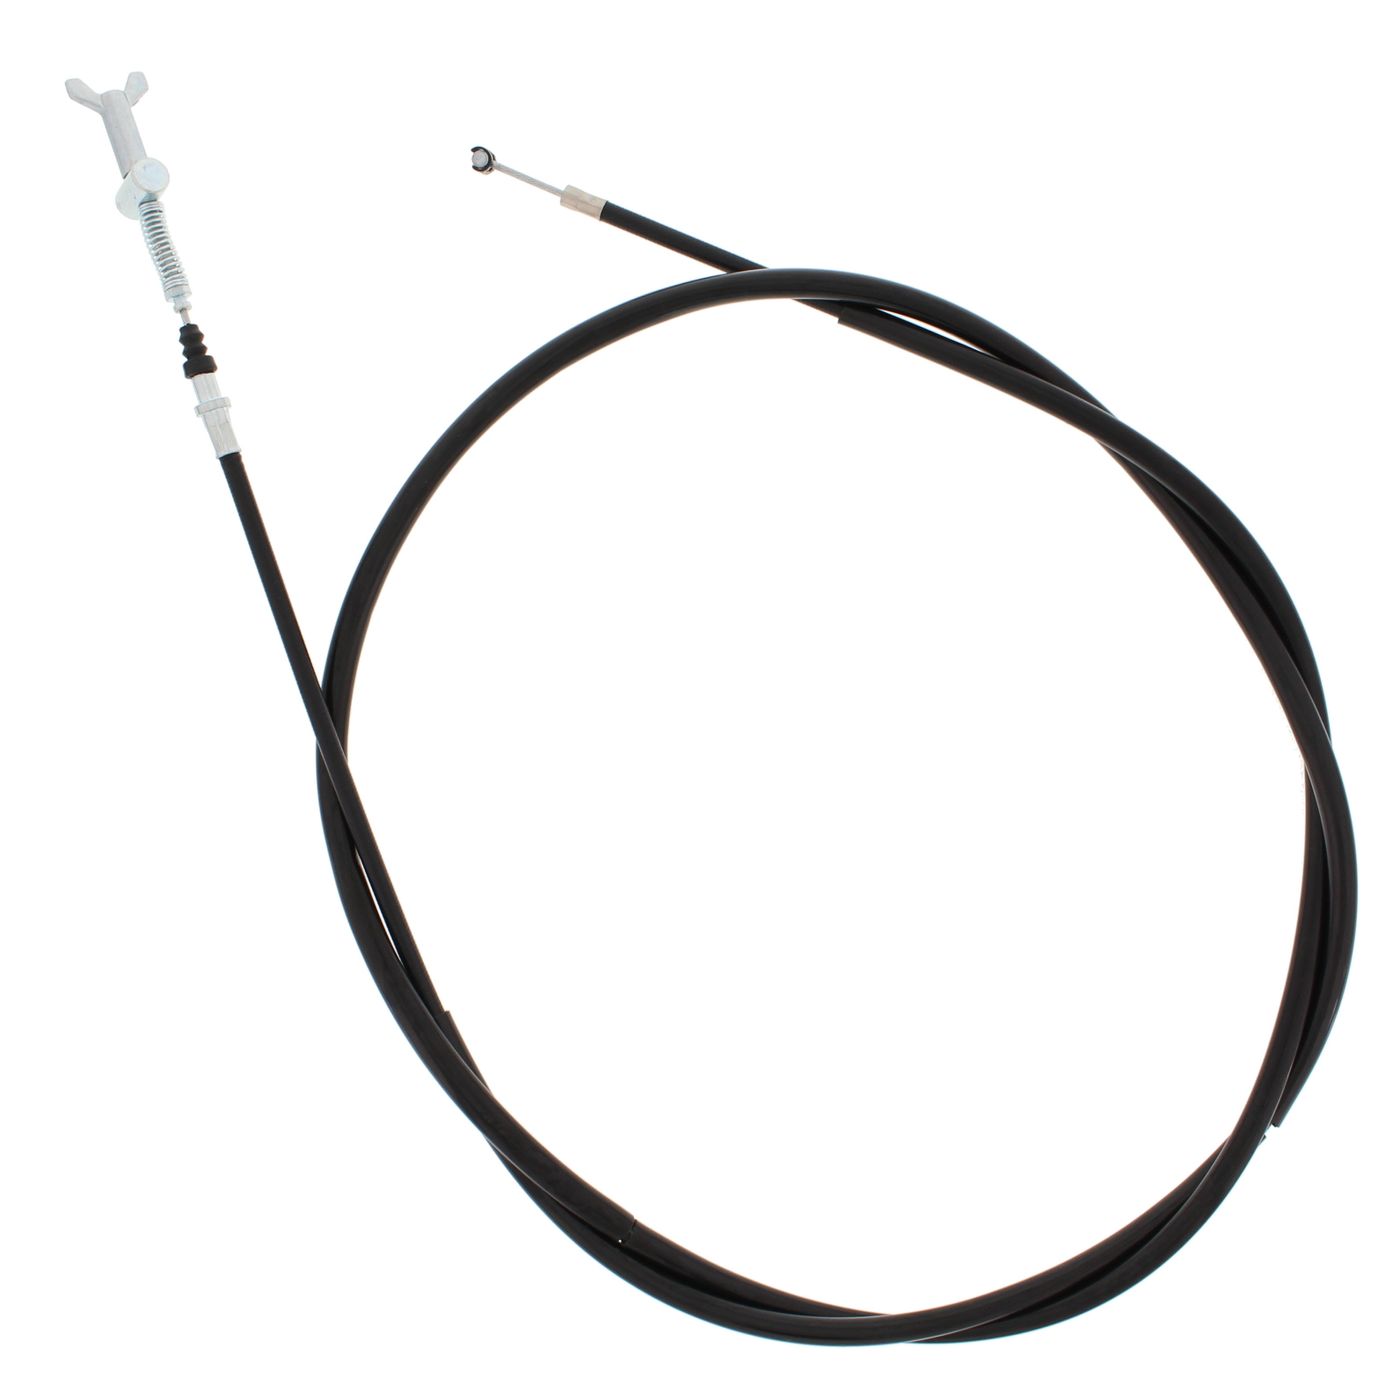 Wrp Brake Cables - WRP454064 image